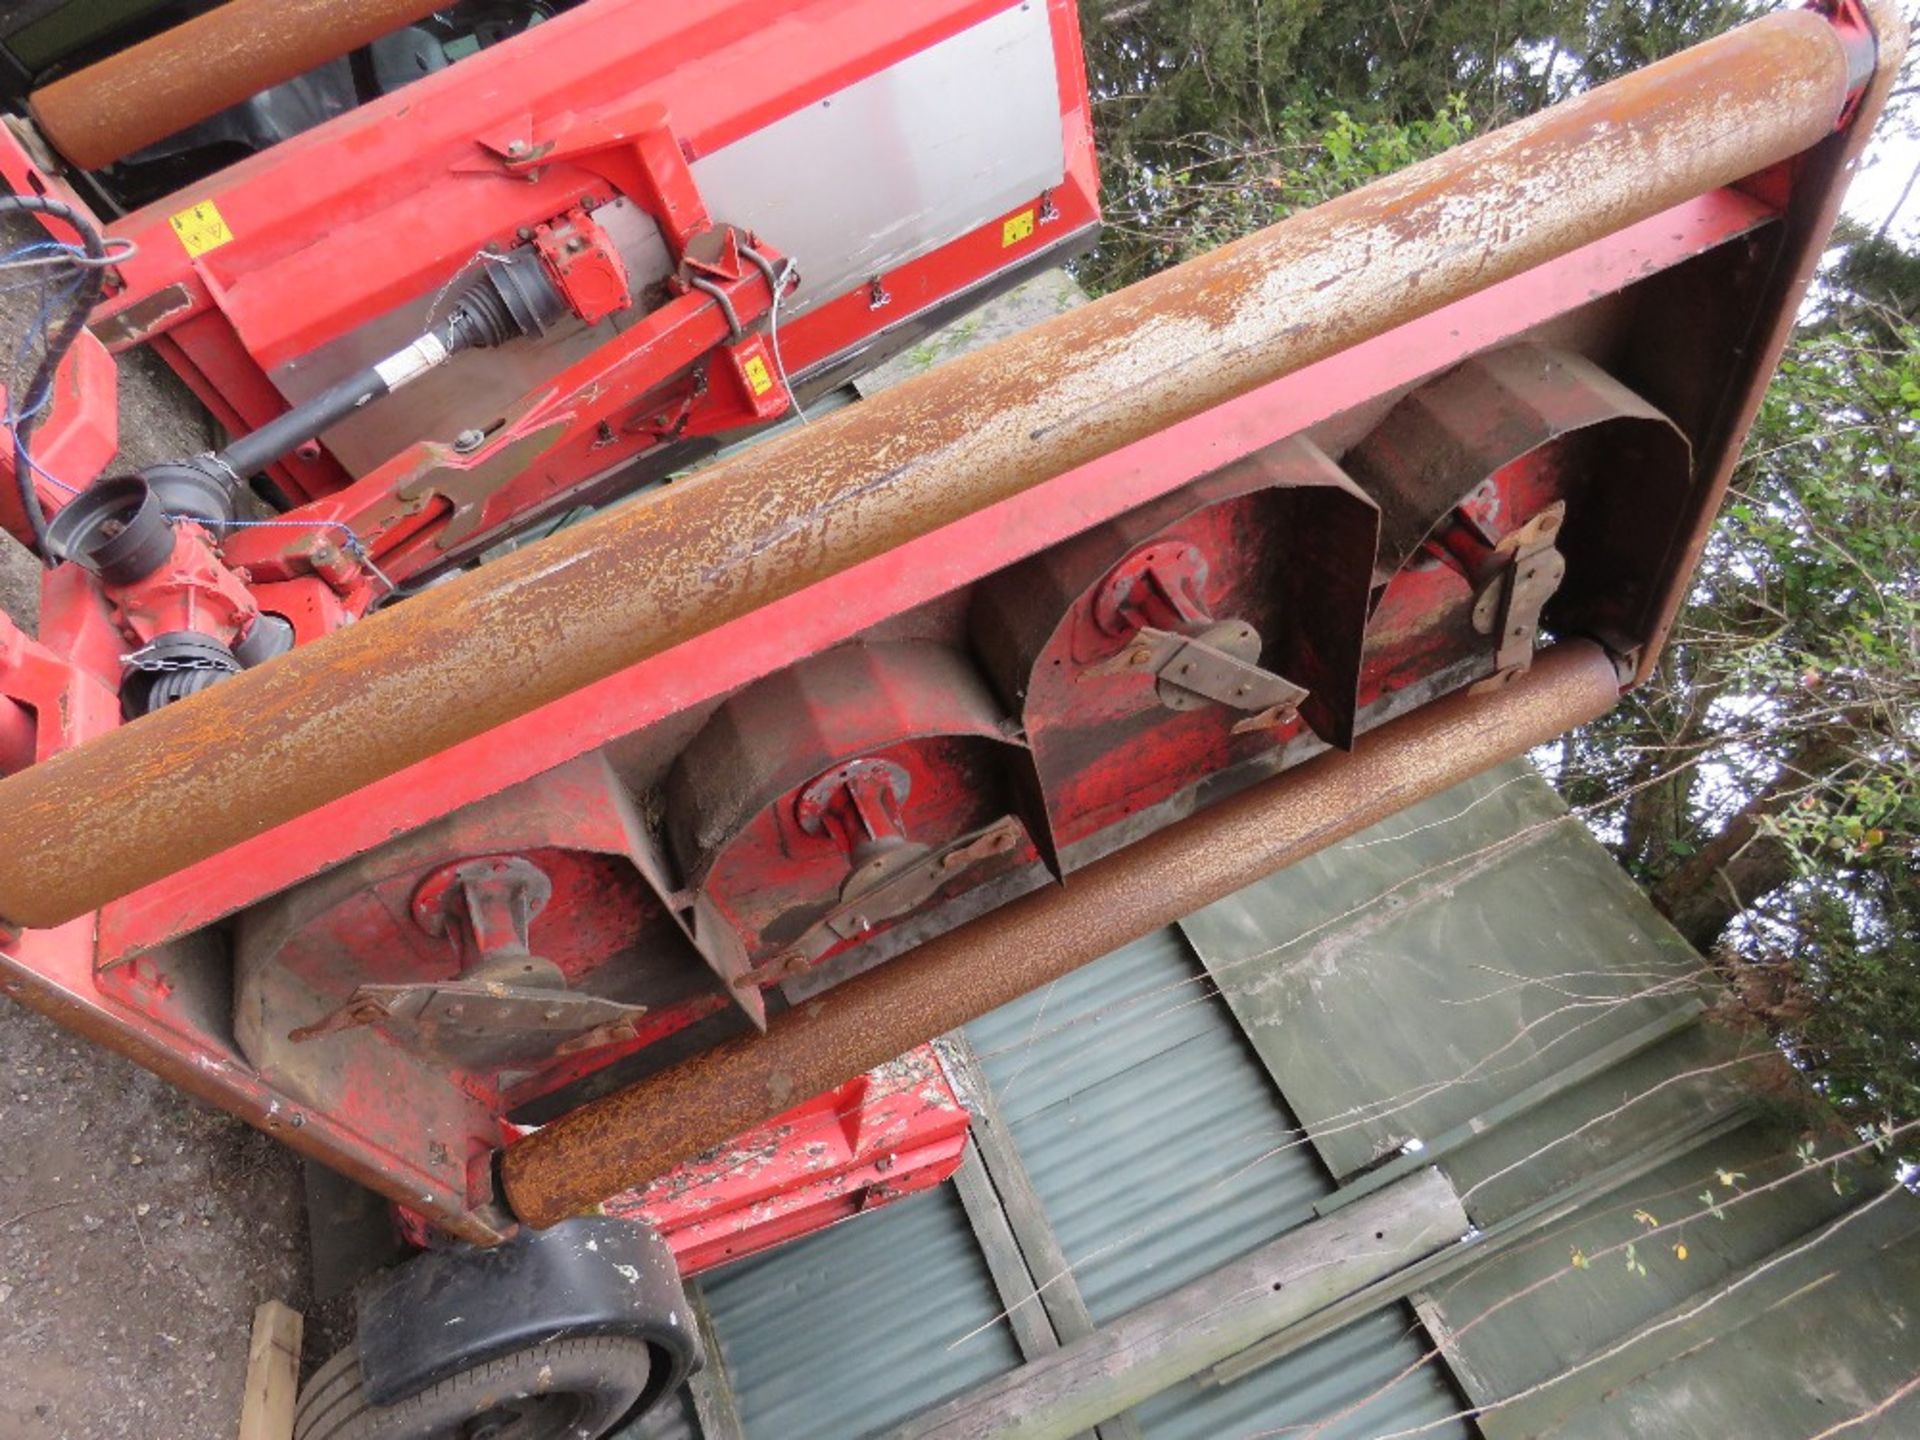 TRIMAX 728-610-400 BATWING TYPE ROLLER MOWER, YEAR 2017. PEGASUS S3 HEADS. NB: REQUIRES REPAIR TO CH - Image 5 of 13